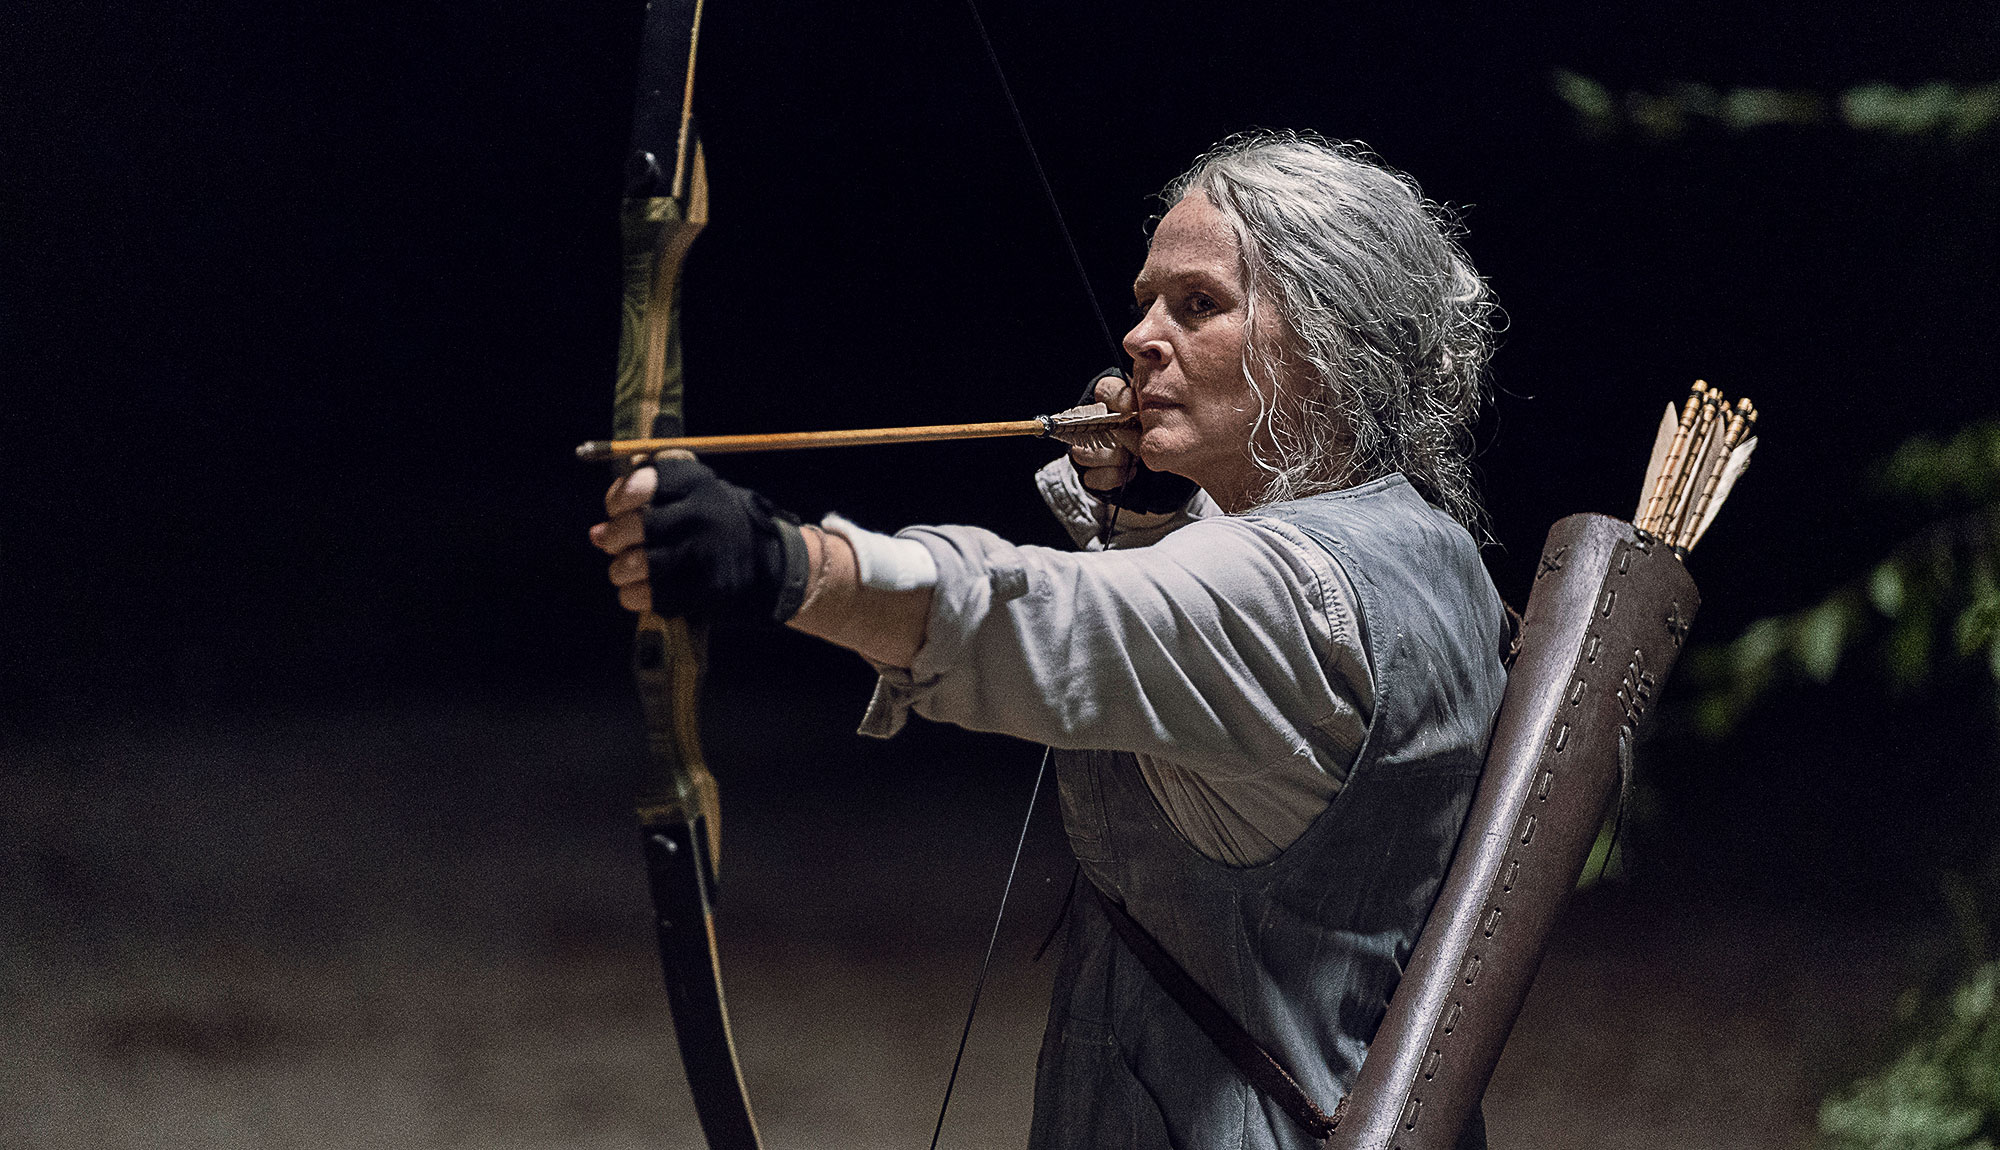 Carol Prepares For Attack In The Walking Dead Episode 1007 Images